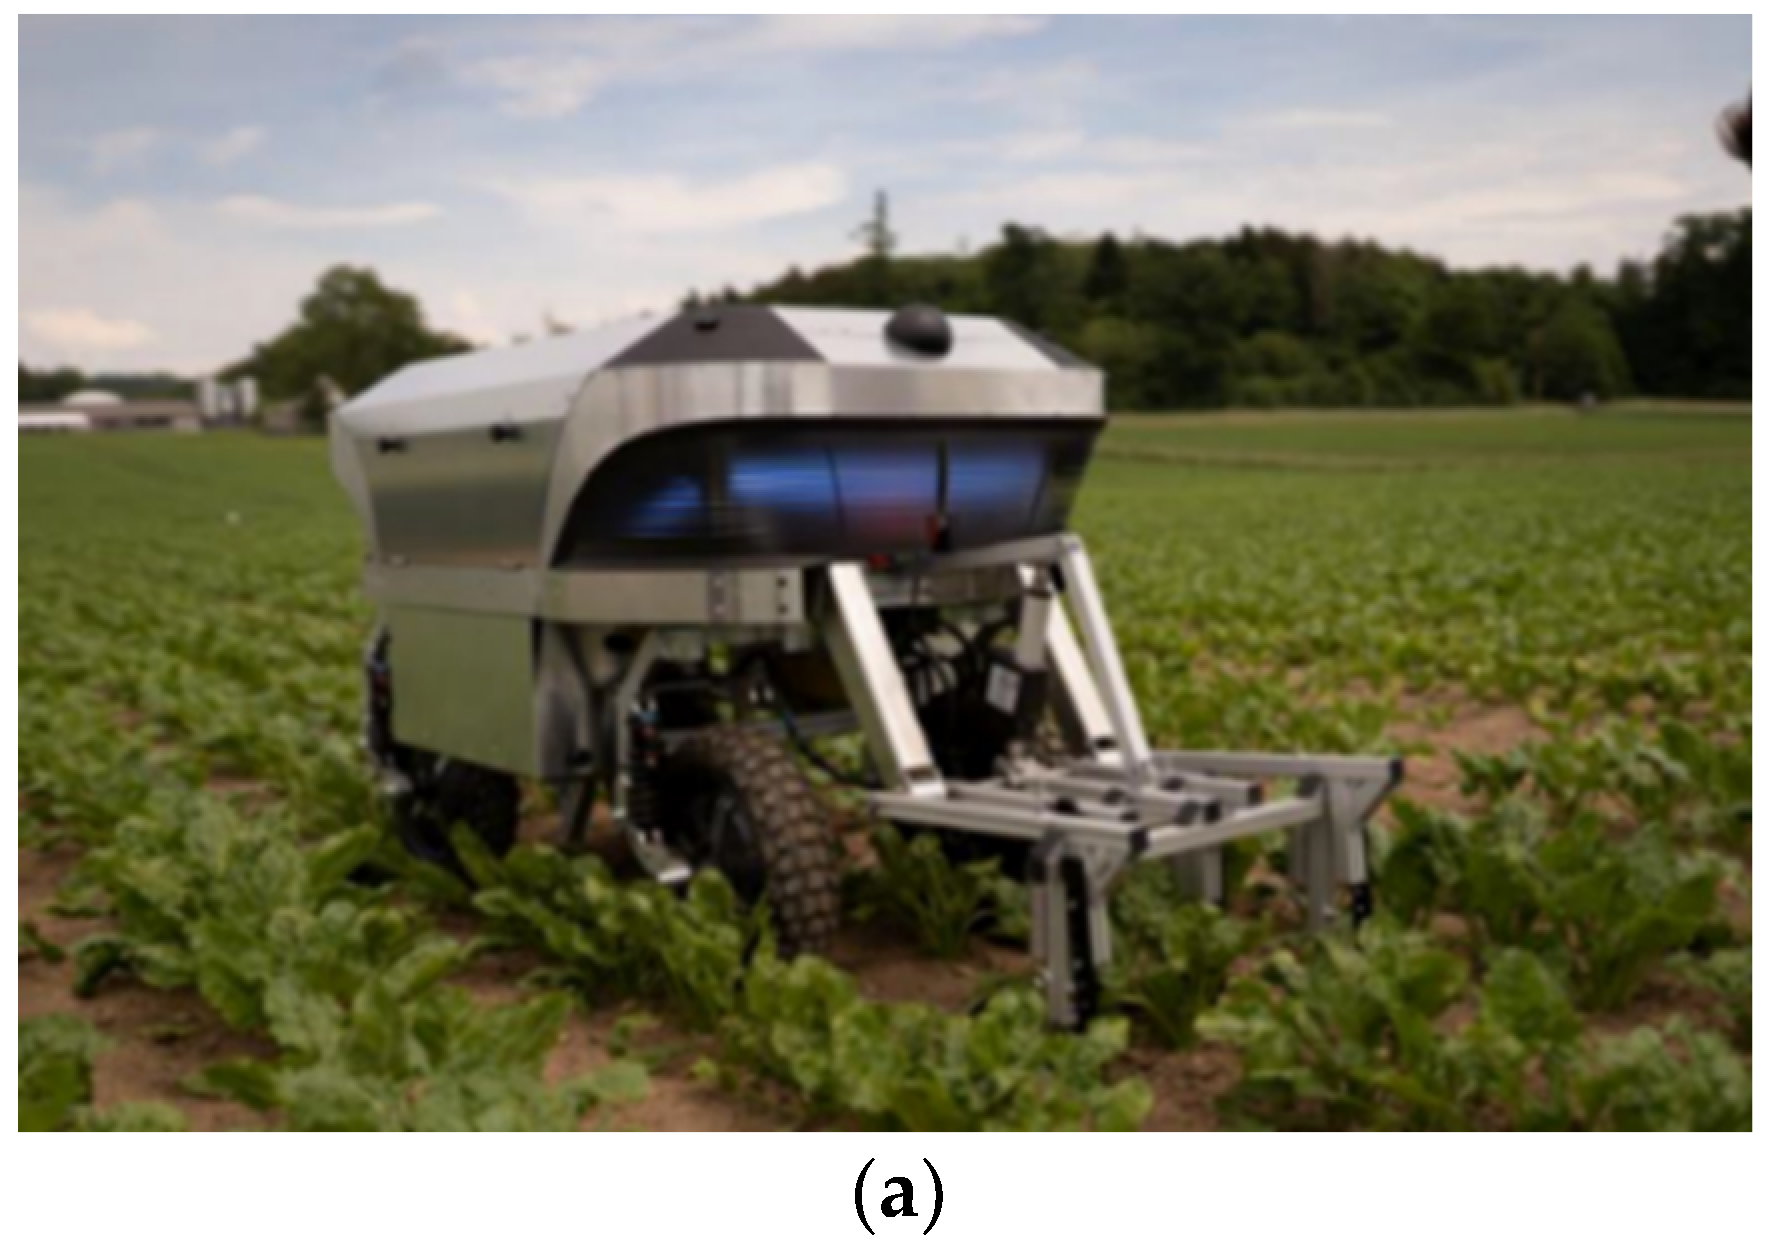 Components of the modular agrochemical precision sprayer mounted on a